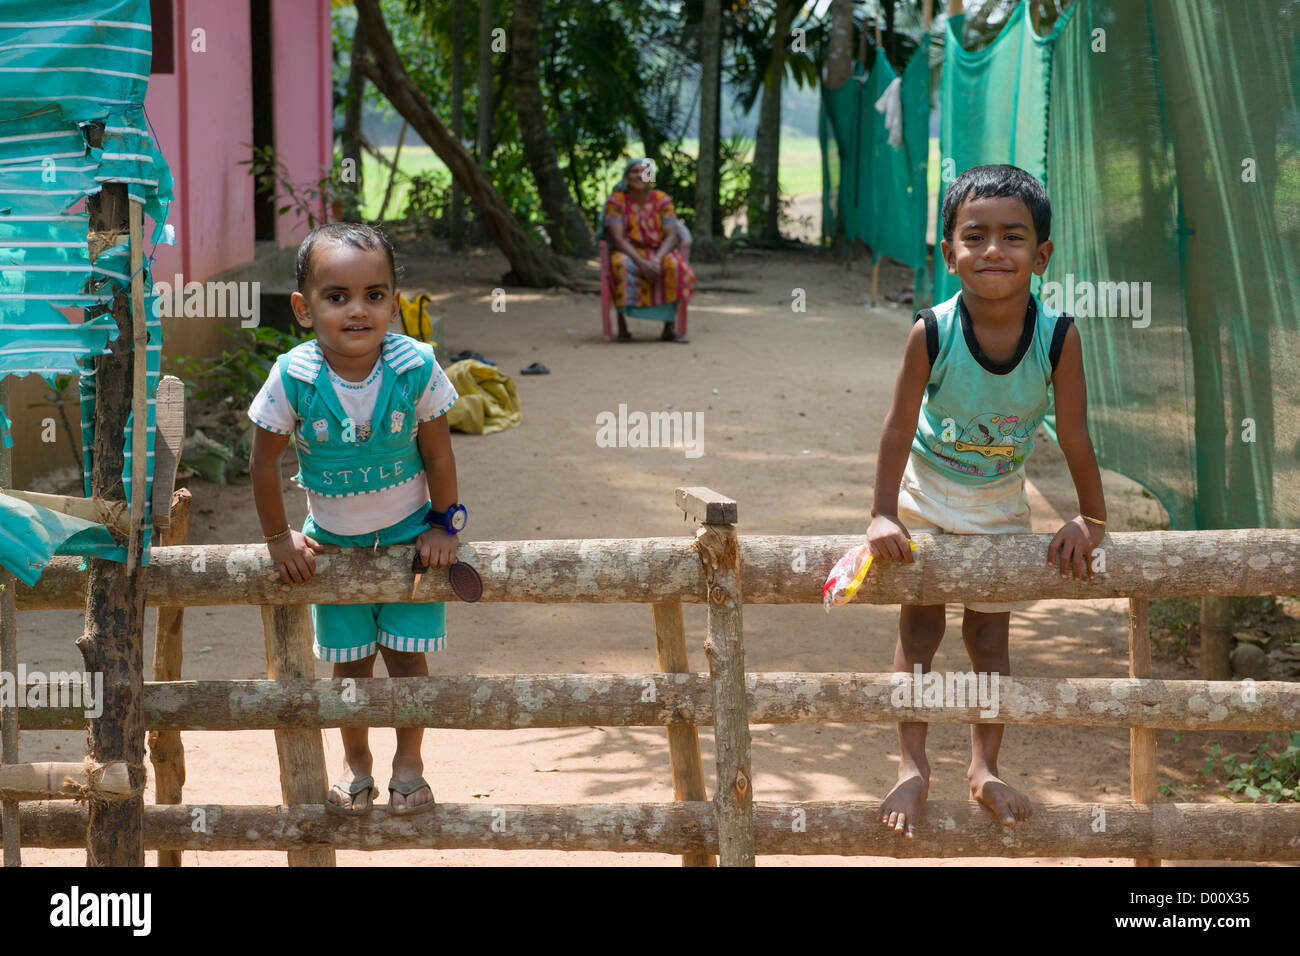 Two boys climbing on a fence with their mother sitting behind, Kanjippadom, near Alappuzha (Alleppey), Kerala, India Stock Photo